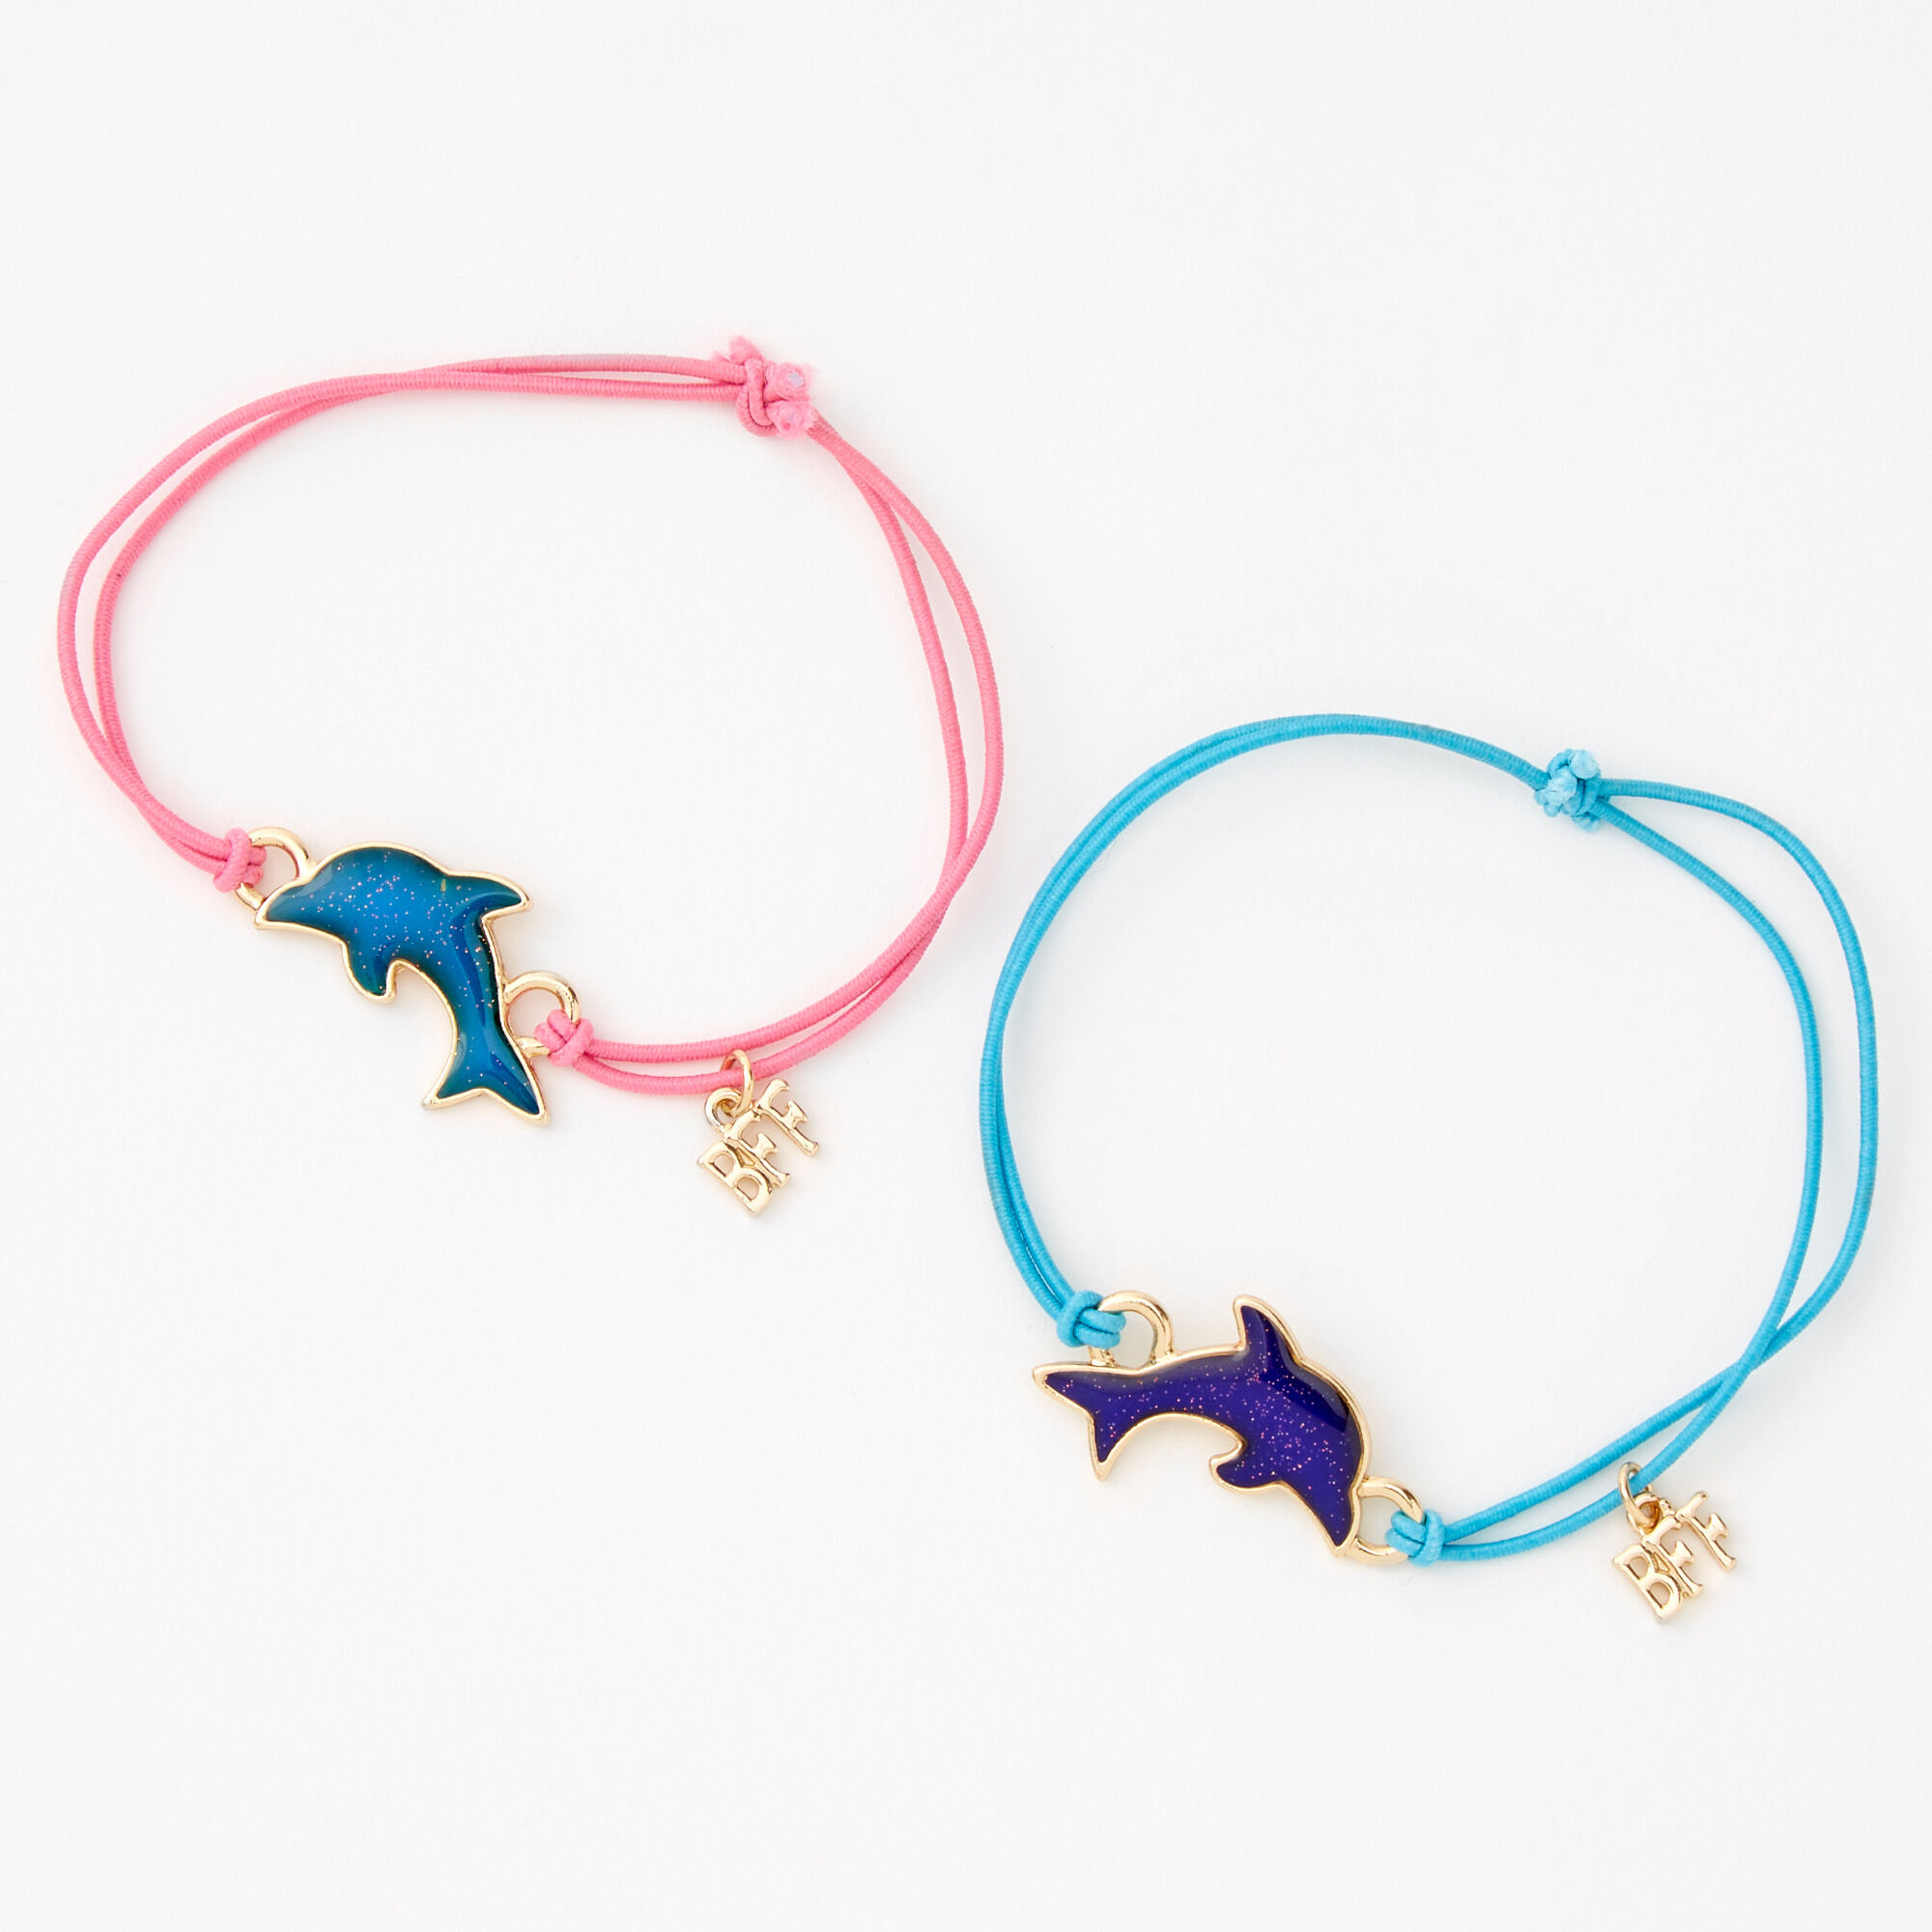 View Claires Best Friends Dolphin Mood Adjustable Cord Bracelets 2 Pack Gold information